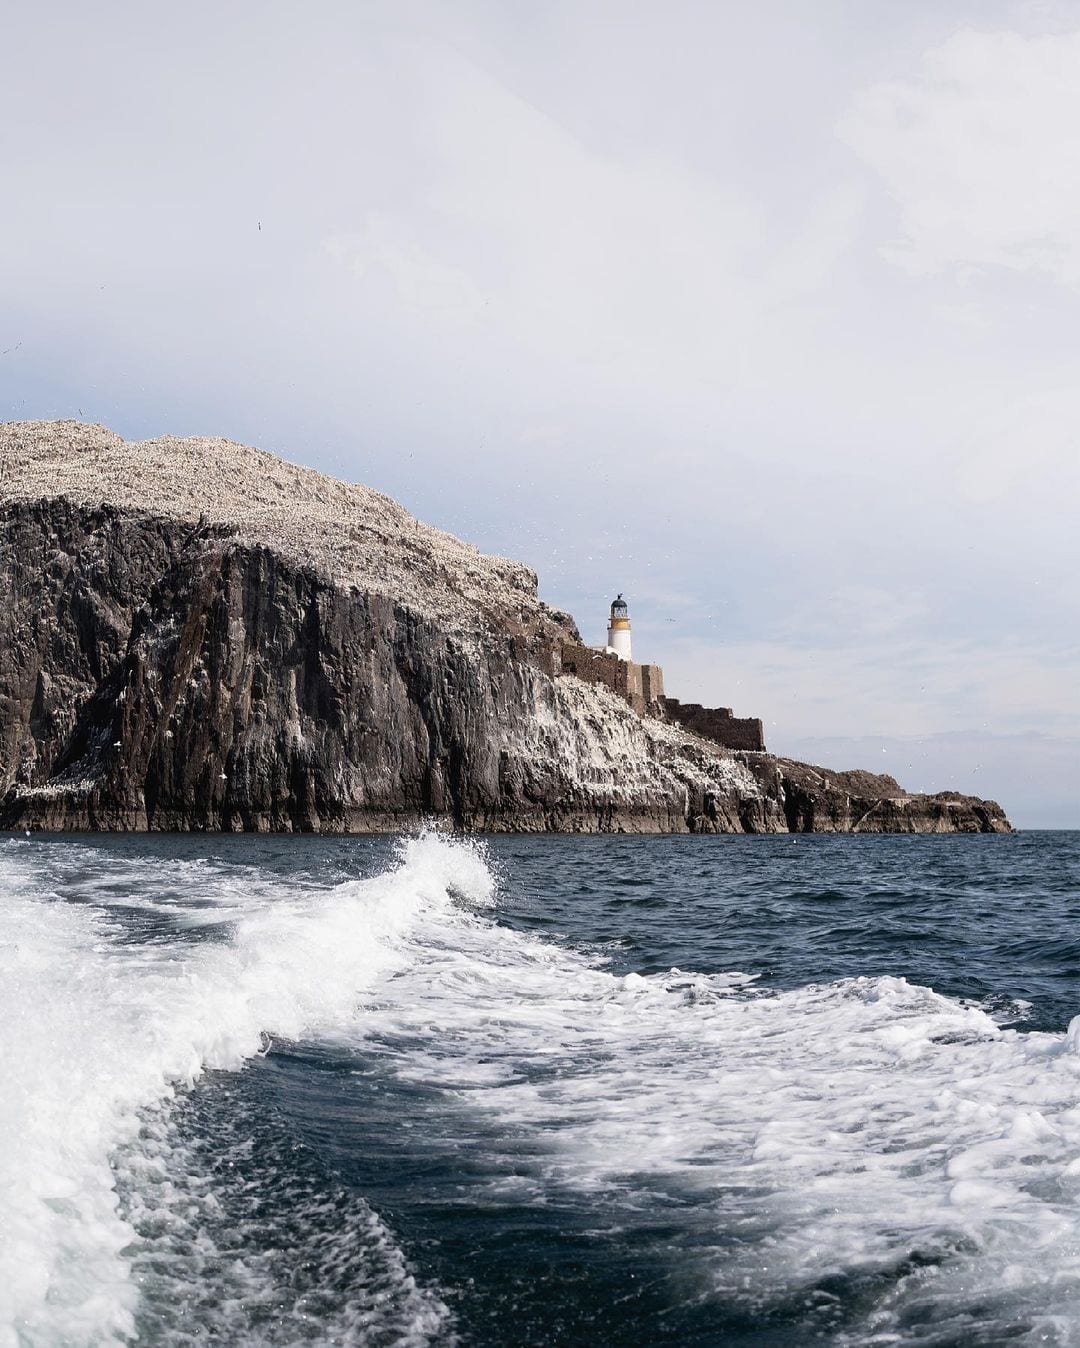 Bass Rock from boat